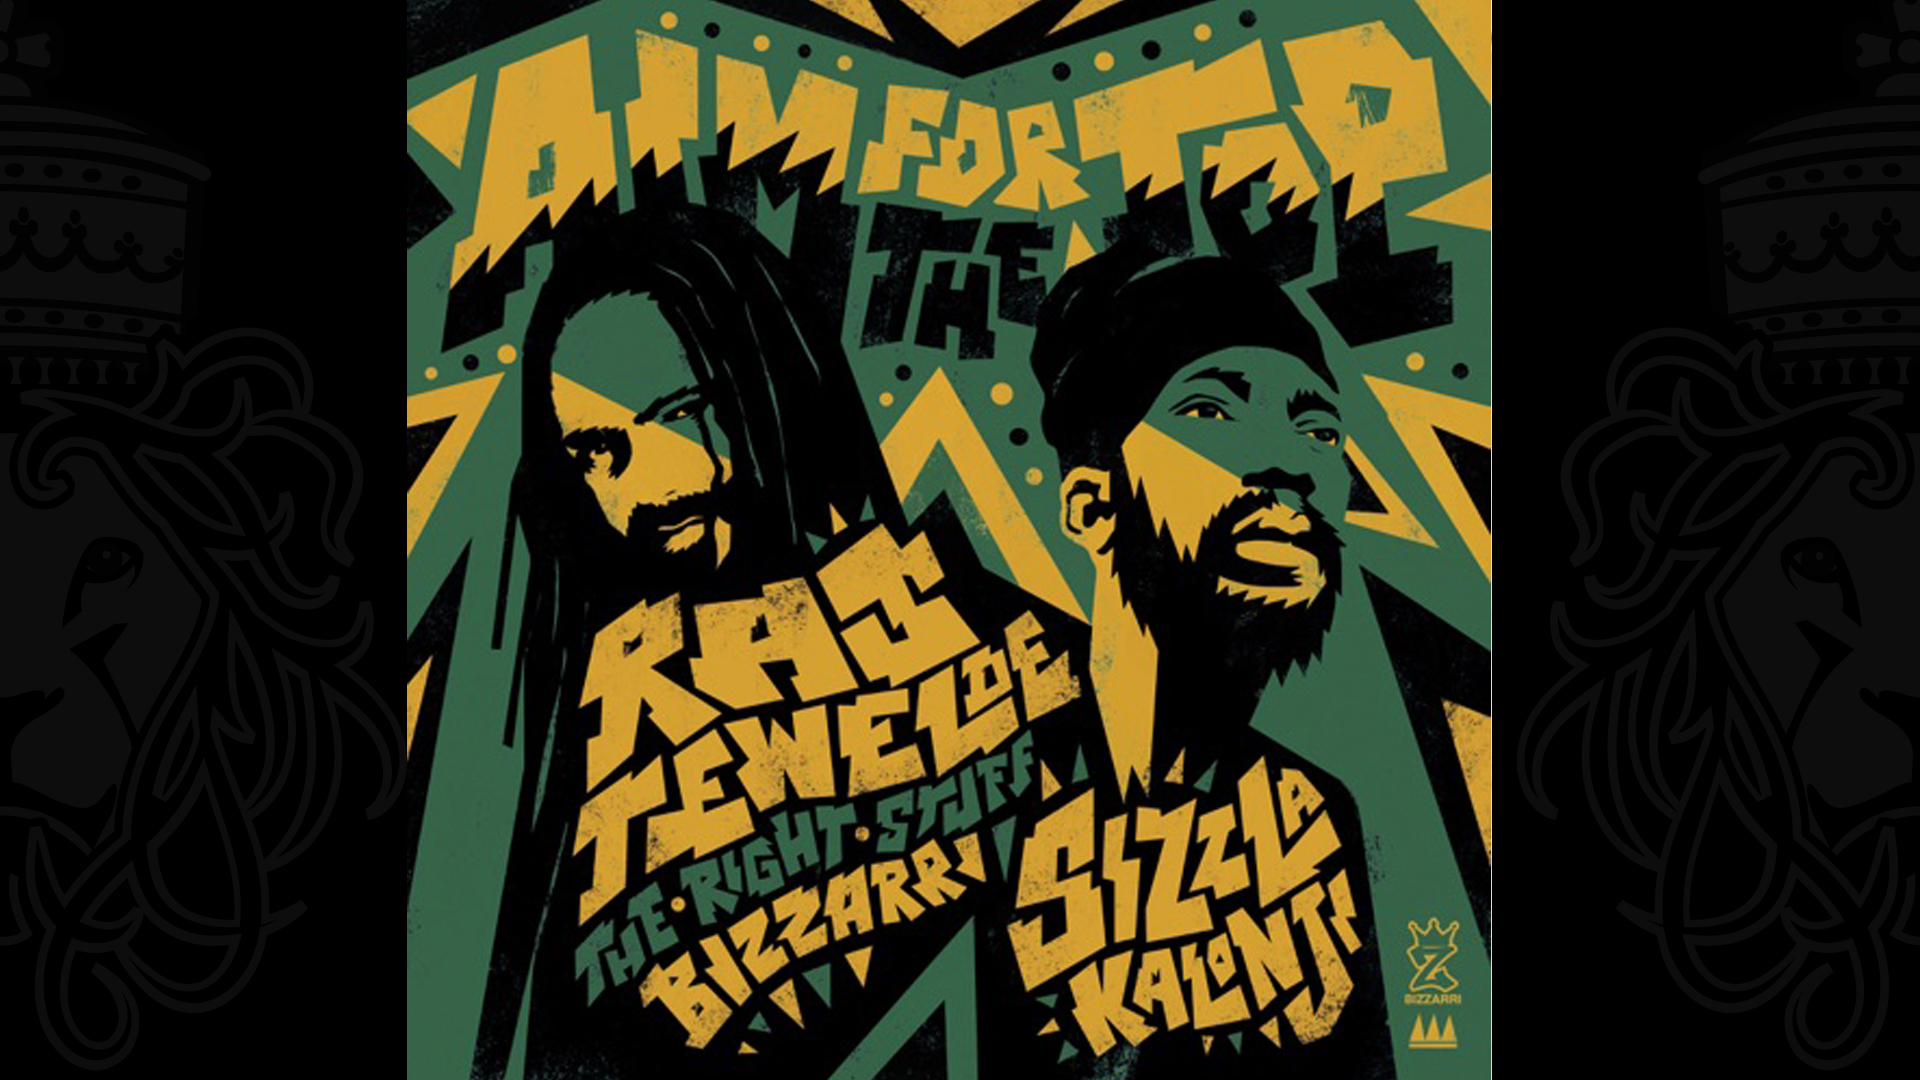 Ras Tewelde & Sizzla feat. The Right Stuff - Aim for the Top